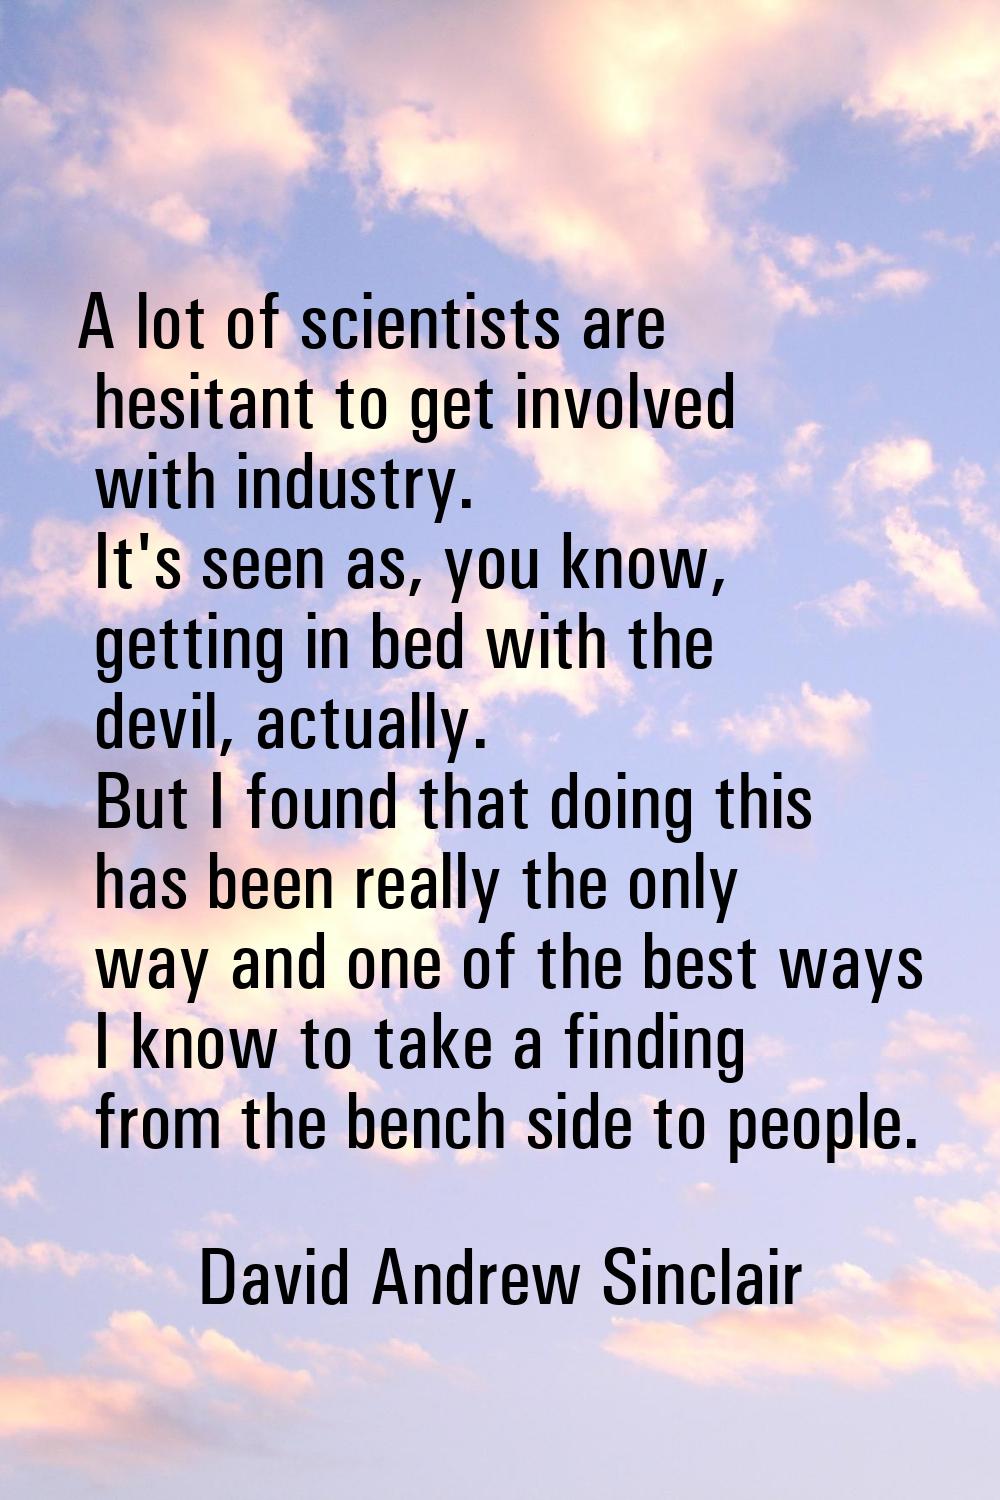 A lot of scientists are hesitant to get involved with industry. It's seen as, you know, getting in 